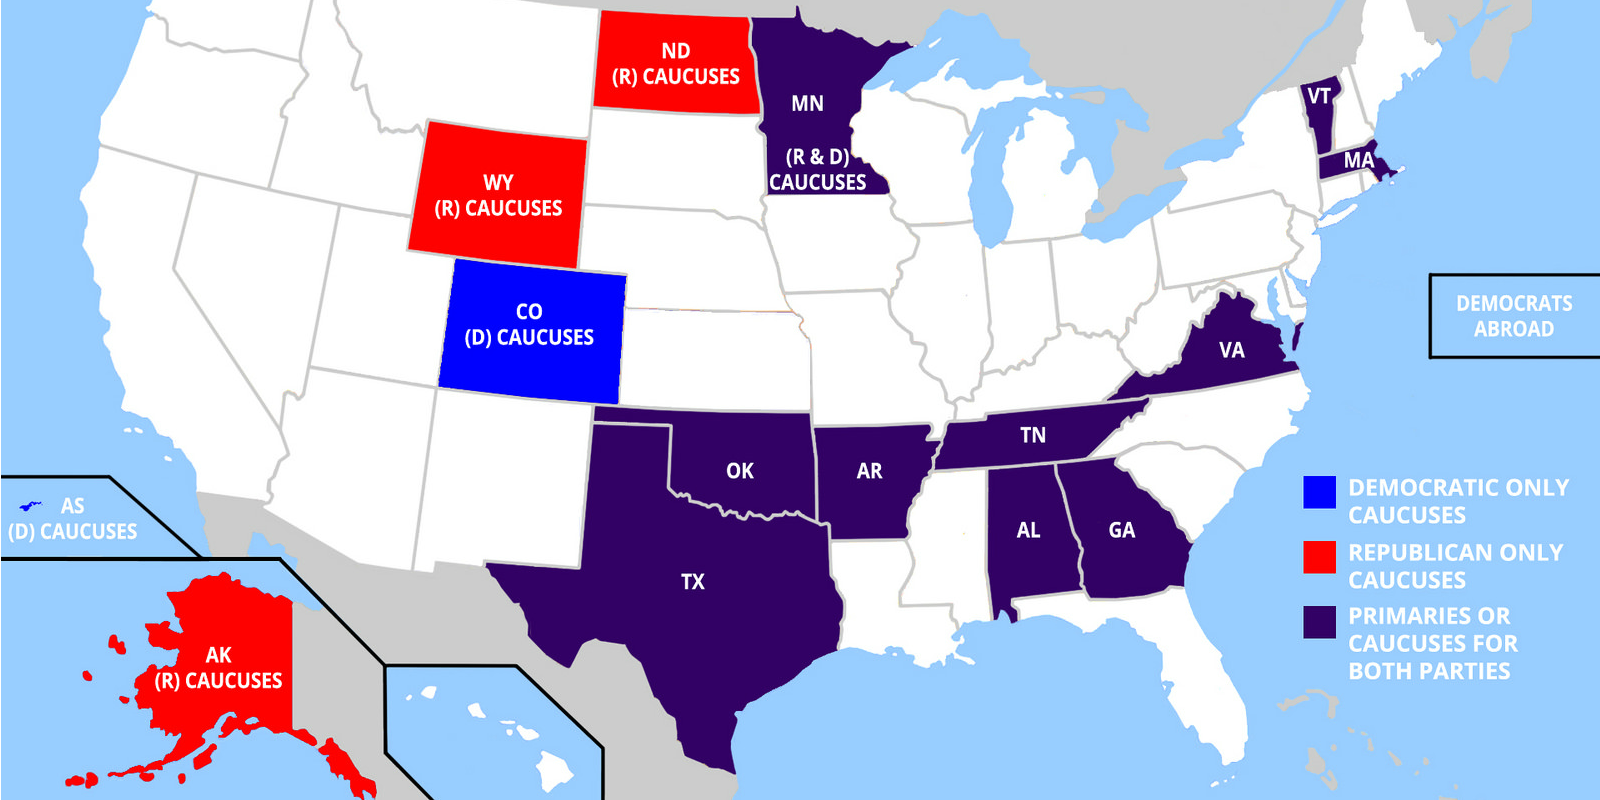 Map of Super Tuesday States 2016 (adapted) (Image by DonkeyHotey [CC BY-SA 2.0] via flickr)